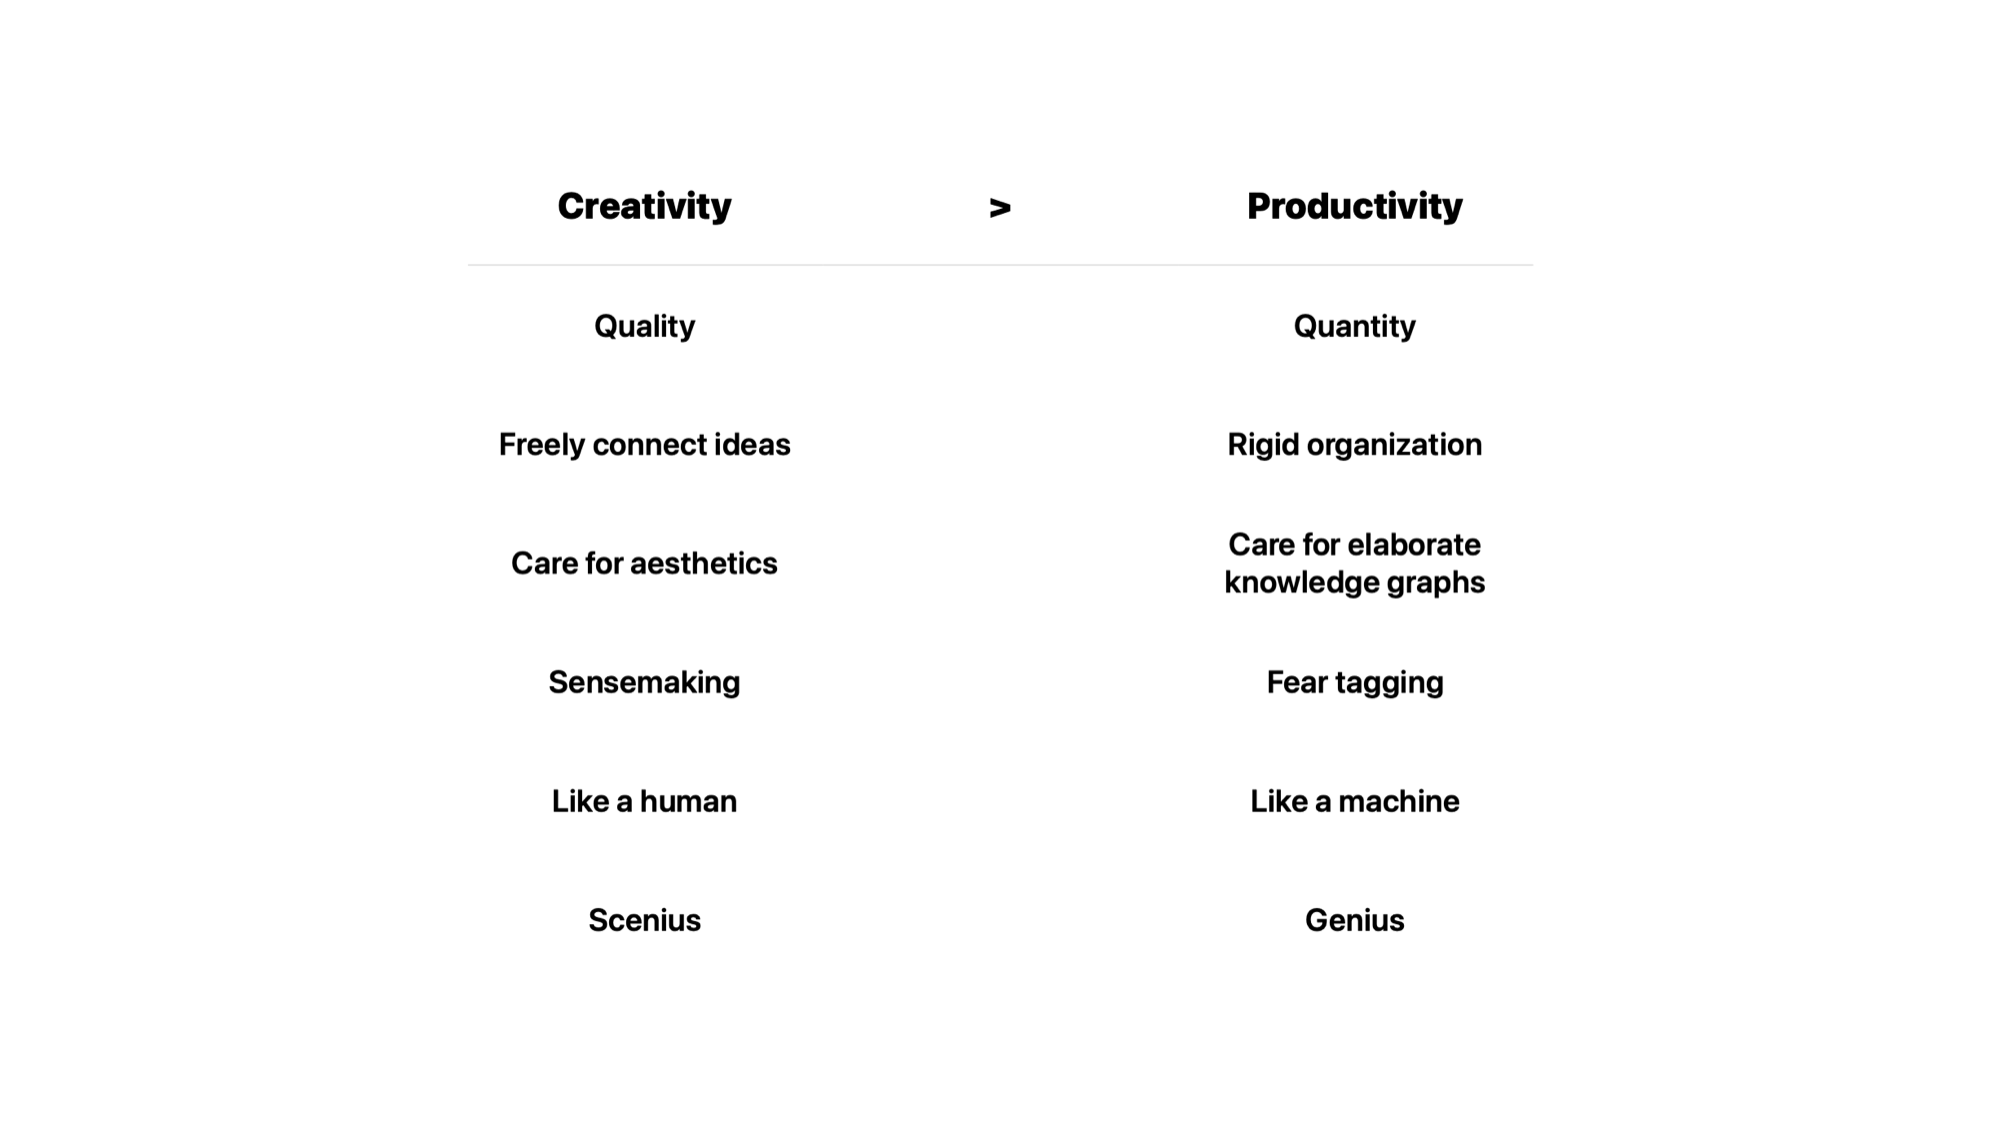 A table contrasts "Creativity" and "Productivity" across various dimensions. Under "Creativity," it lists qualities like quality over quantity, freely connecting ideas, care for aesthetics, sensemaking, being like a human, and "scenius" (collective genius). Under "Productivity," it emphasizes quantity, rigid organization, care for elaborate knowledge graphs, fear tagging, being like a machine, and individual "genius." The table suggests that creativity values flexible, aesthetic, and human-like approaches, while productivity focuses on structured, efficient, and machine-like methods.